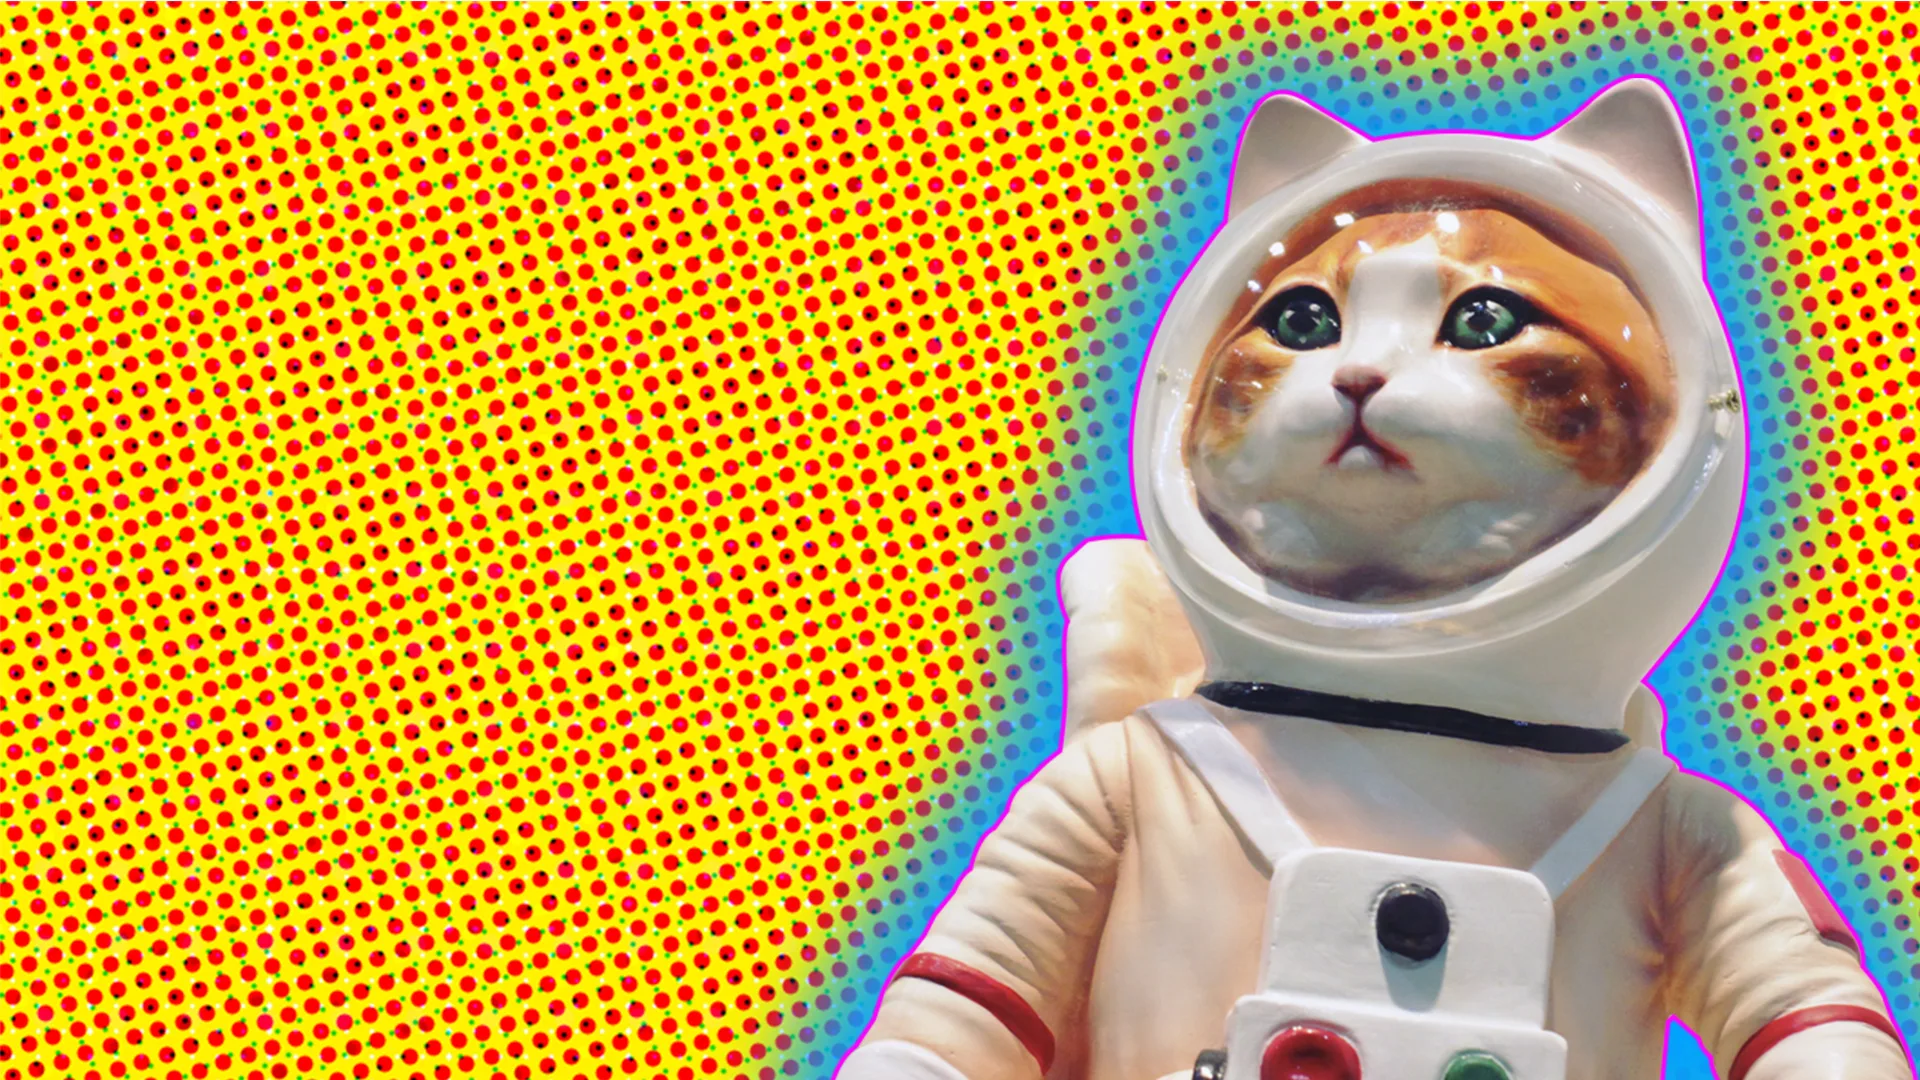 Astronaut cat with a polkadot background and a glow around the image